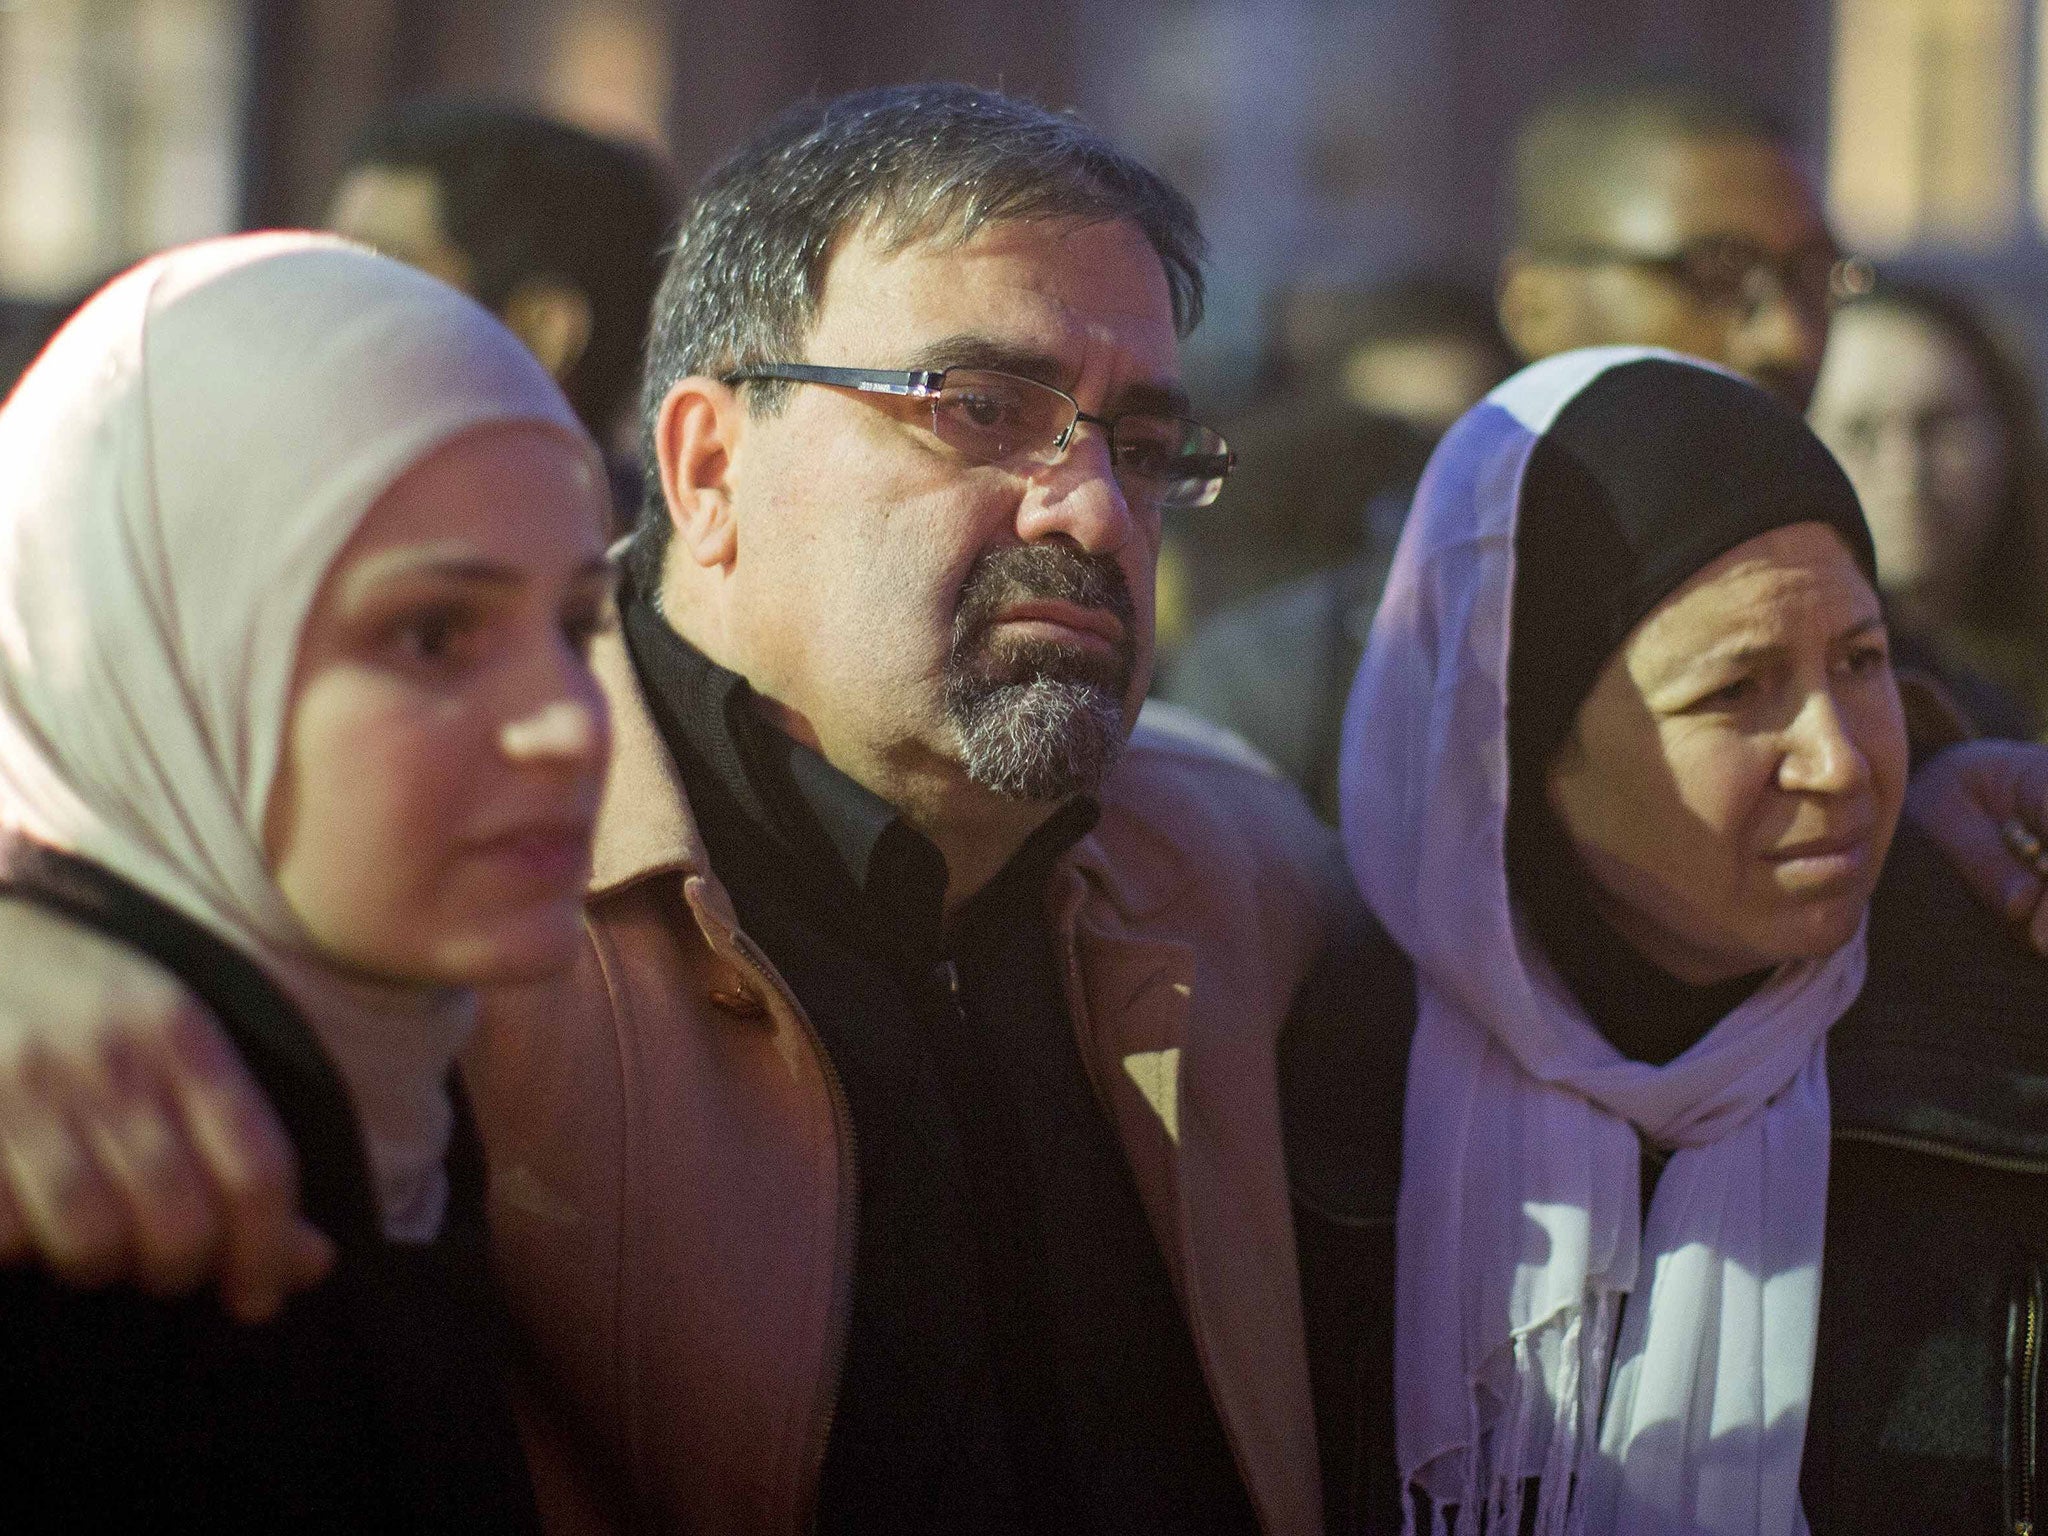 Namee Barakat with his wife Layla (R) and daughter Suzanne, family of shooting victim Deah Shaddy Barakat (Reuters)